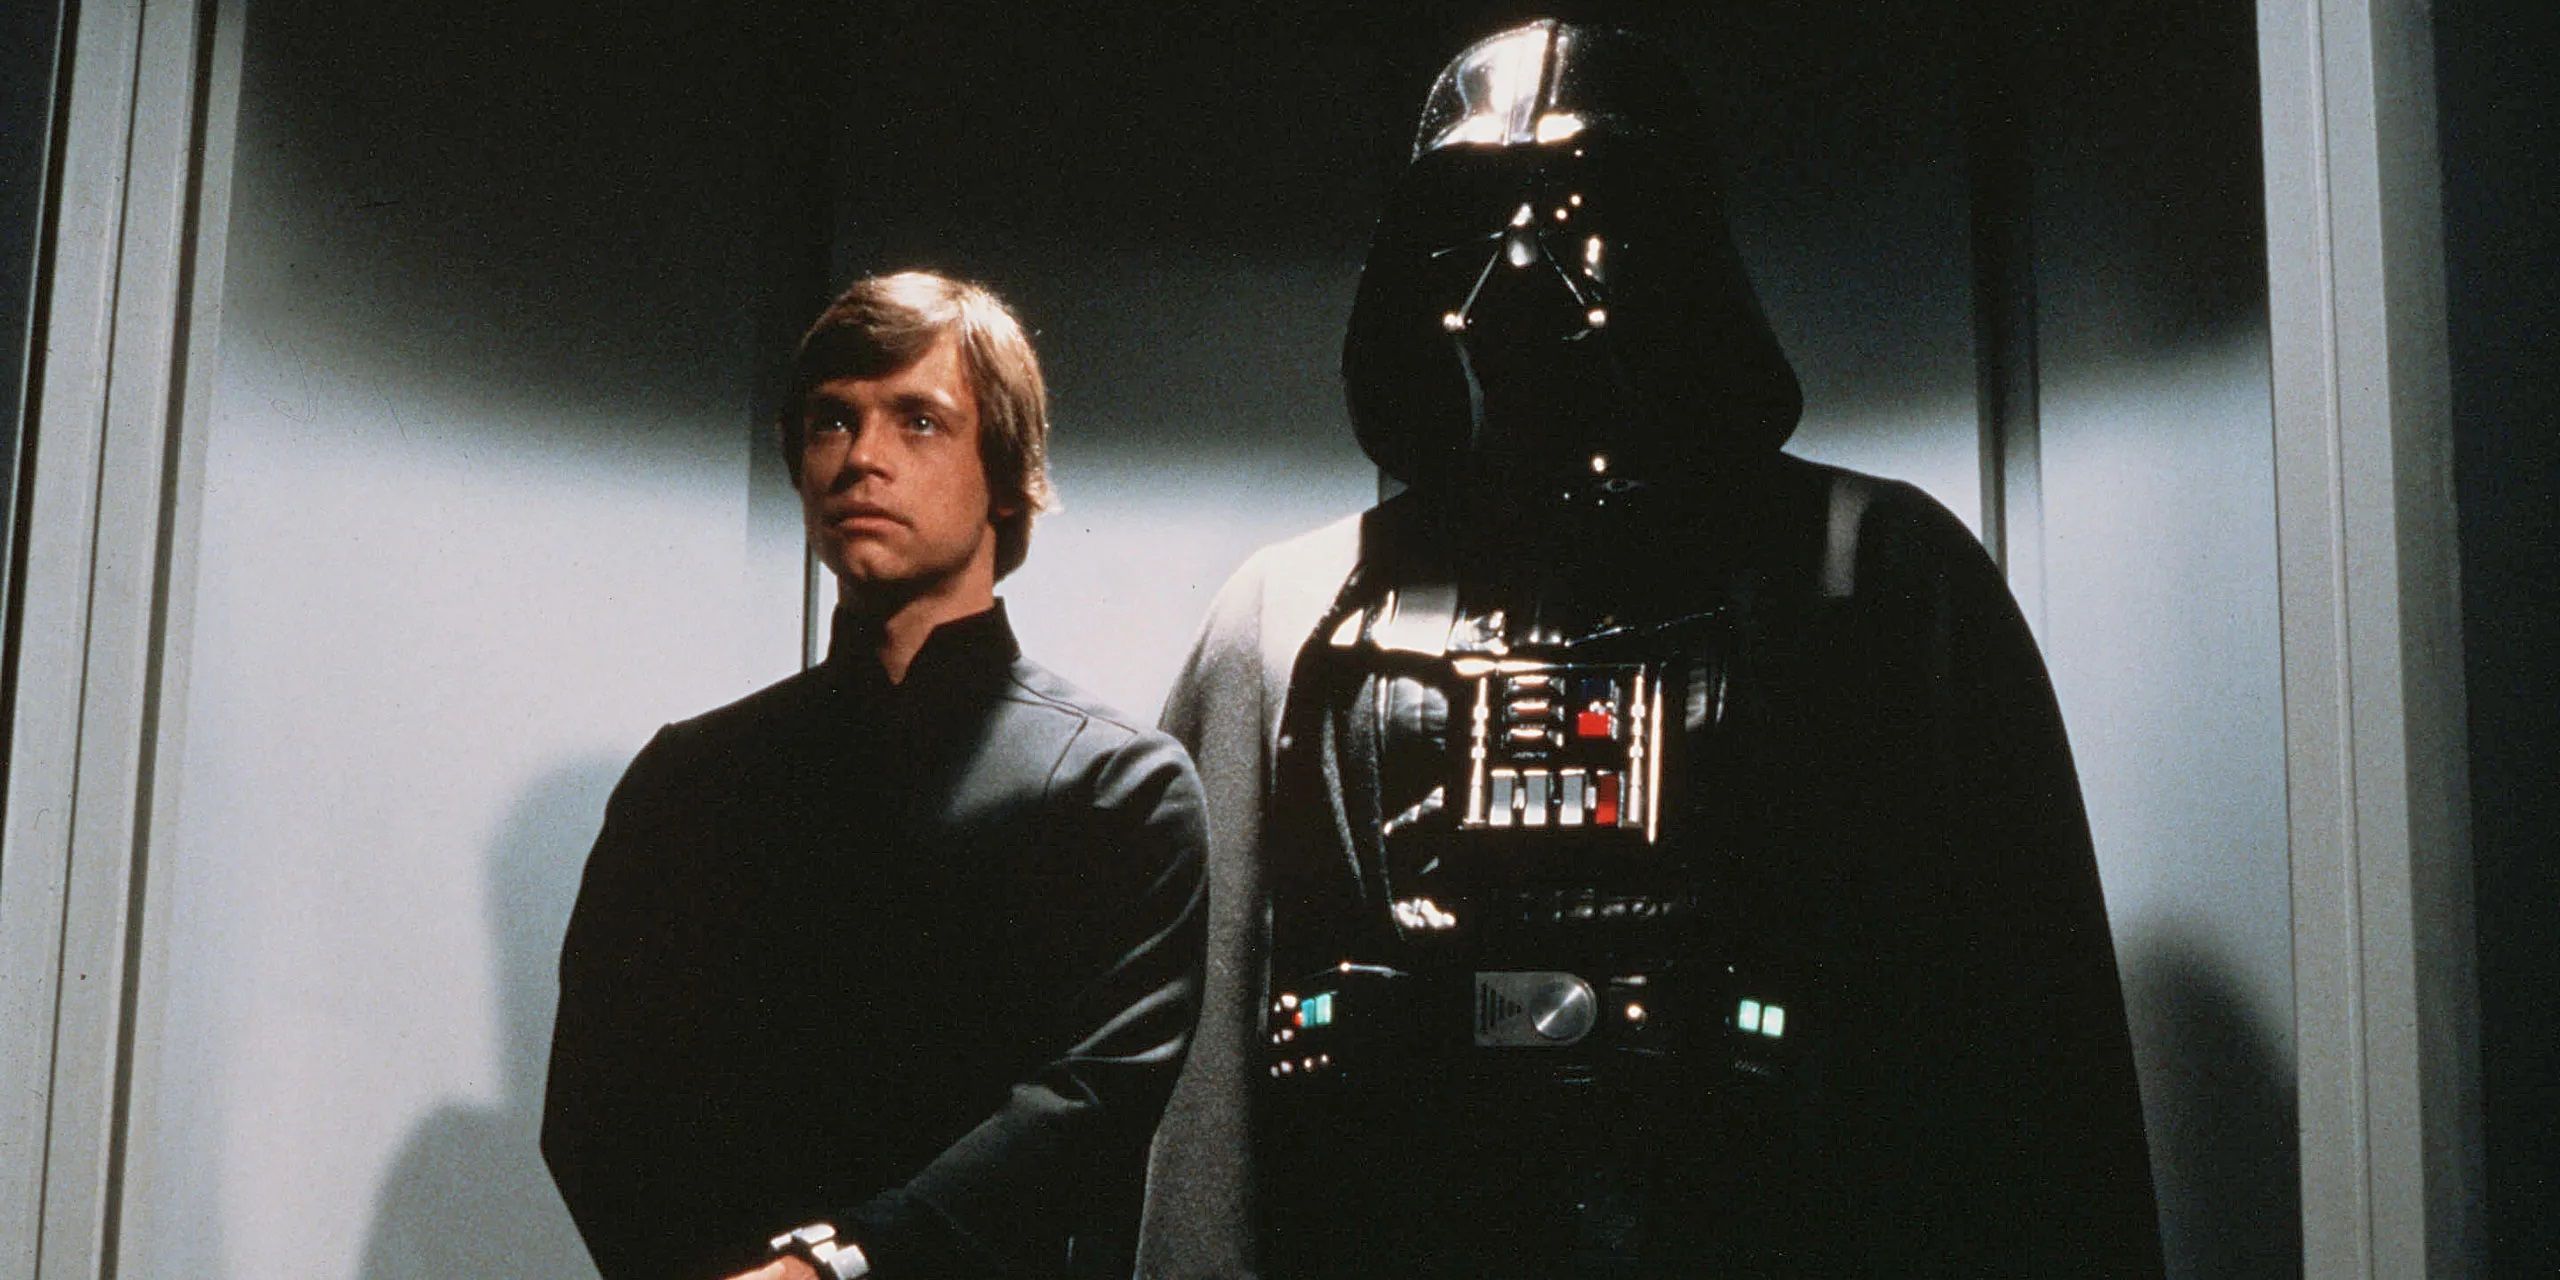 Luke and Vader arrive in the Emperor's throne room in Return of the Jedi